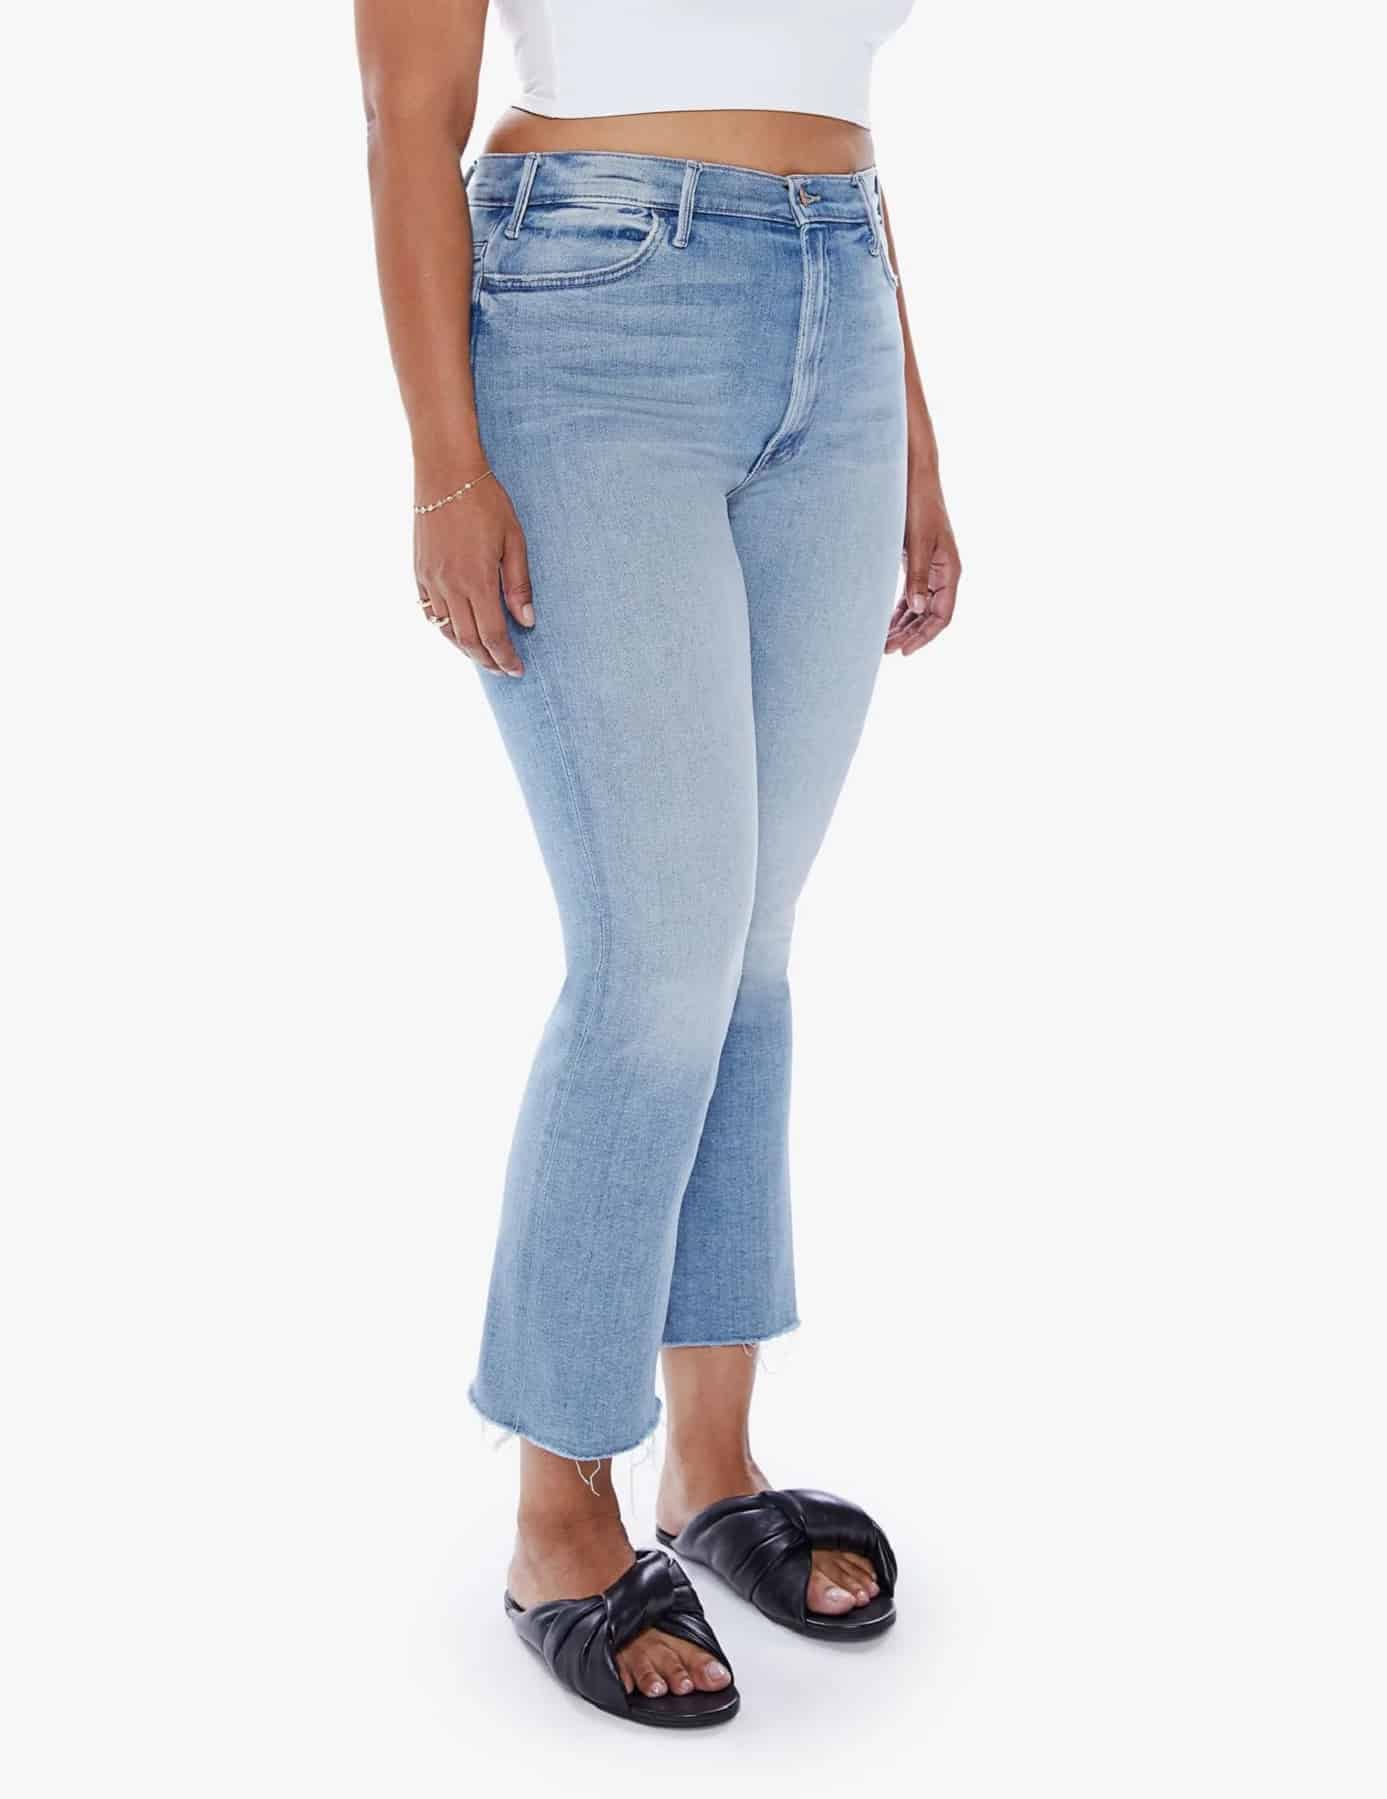 Best Jeans For Pear Shape Babes That Are So Flattering for 2023!